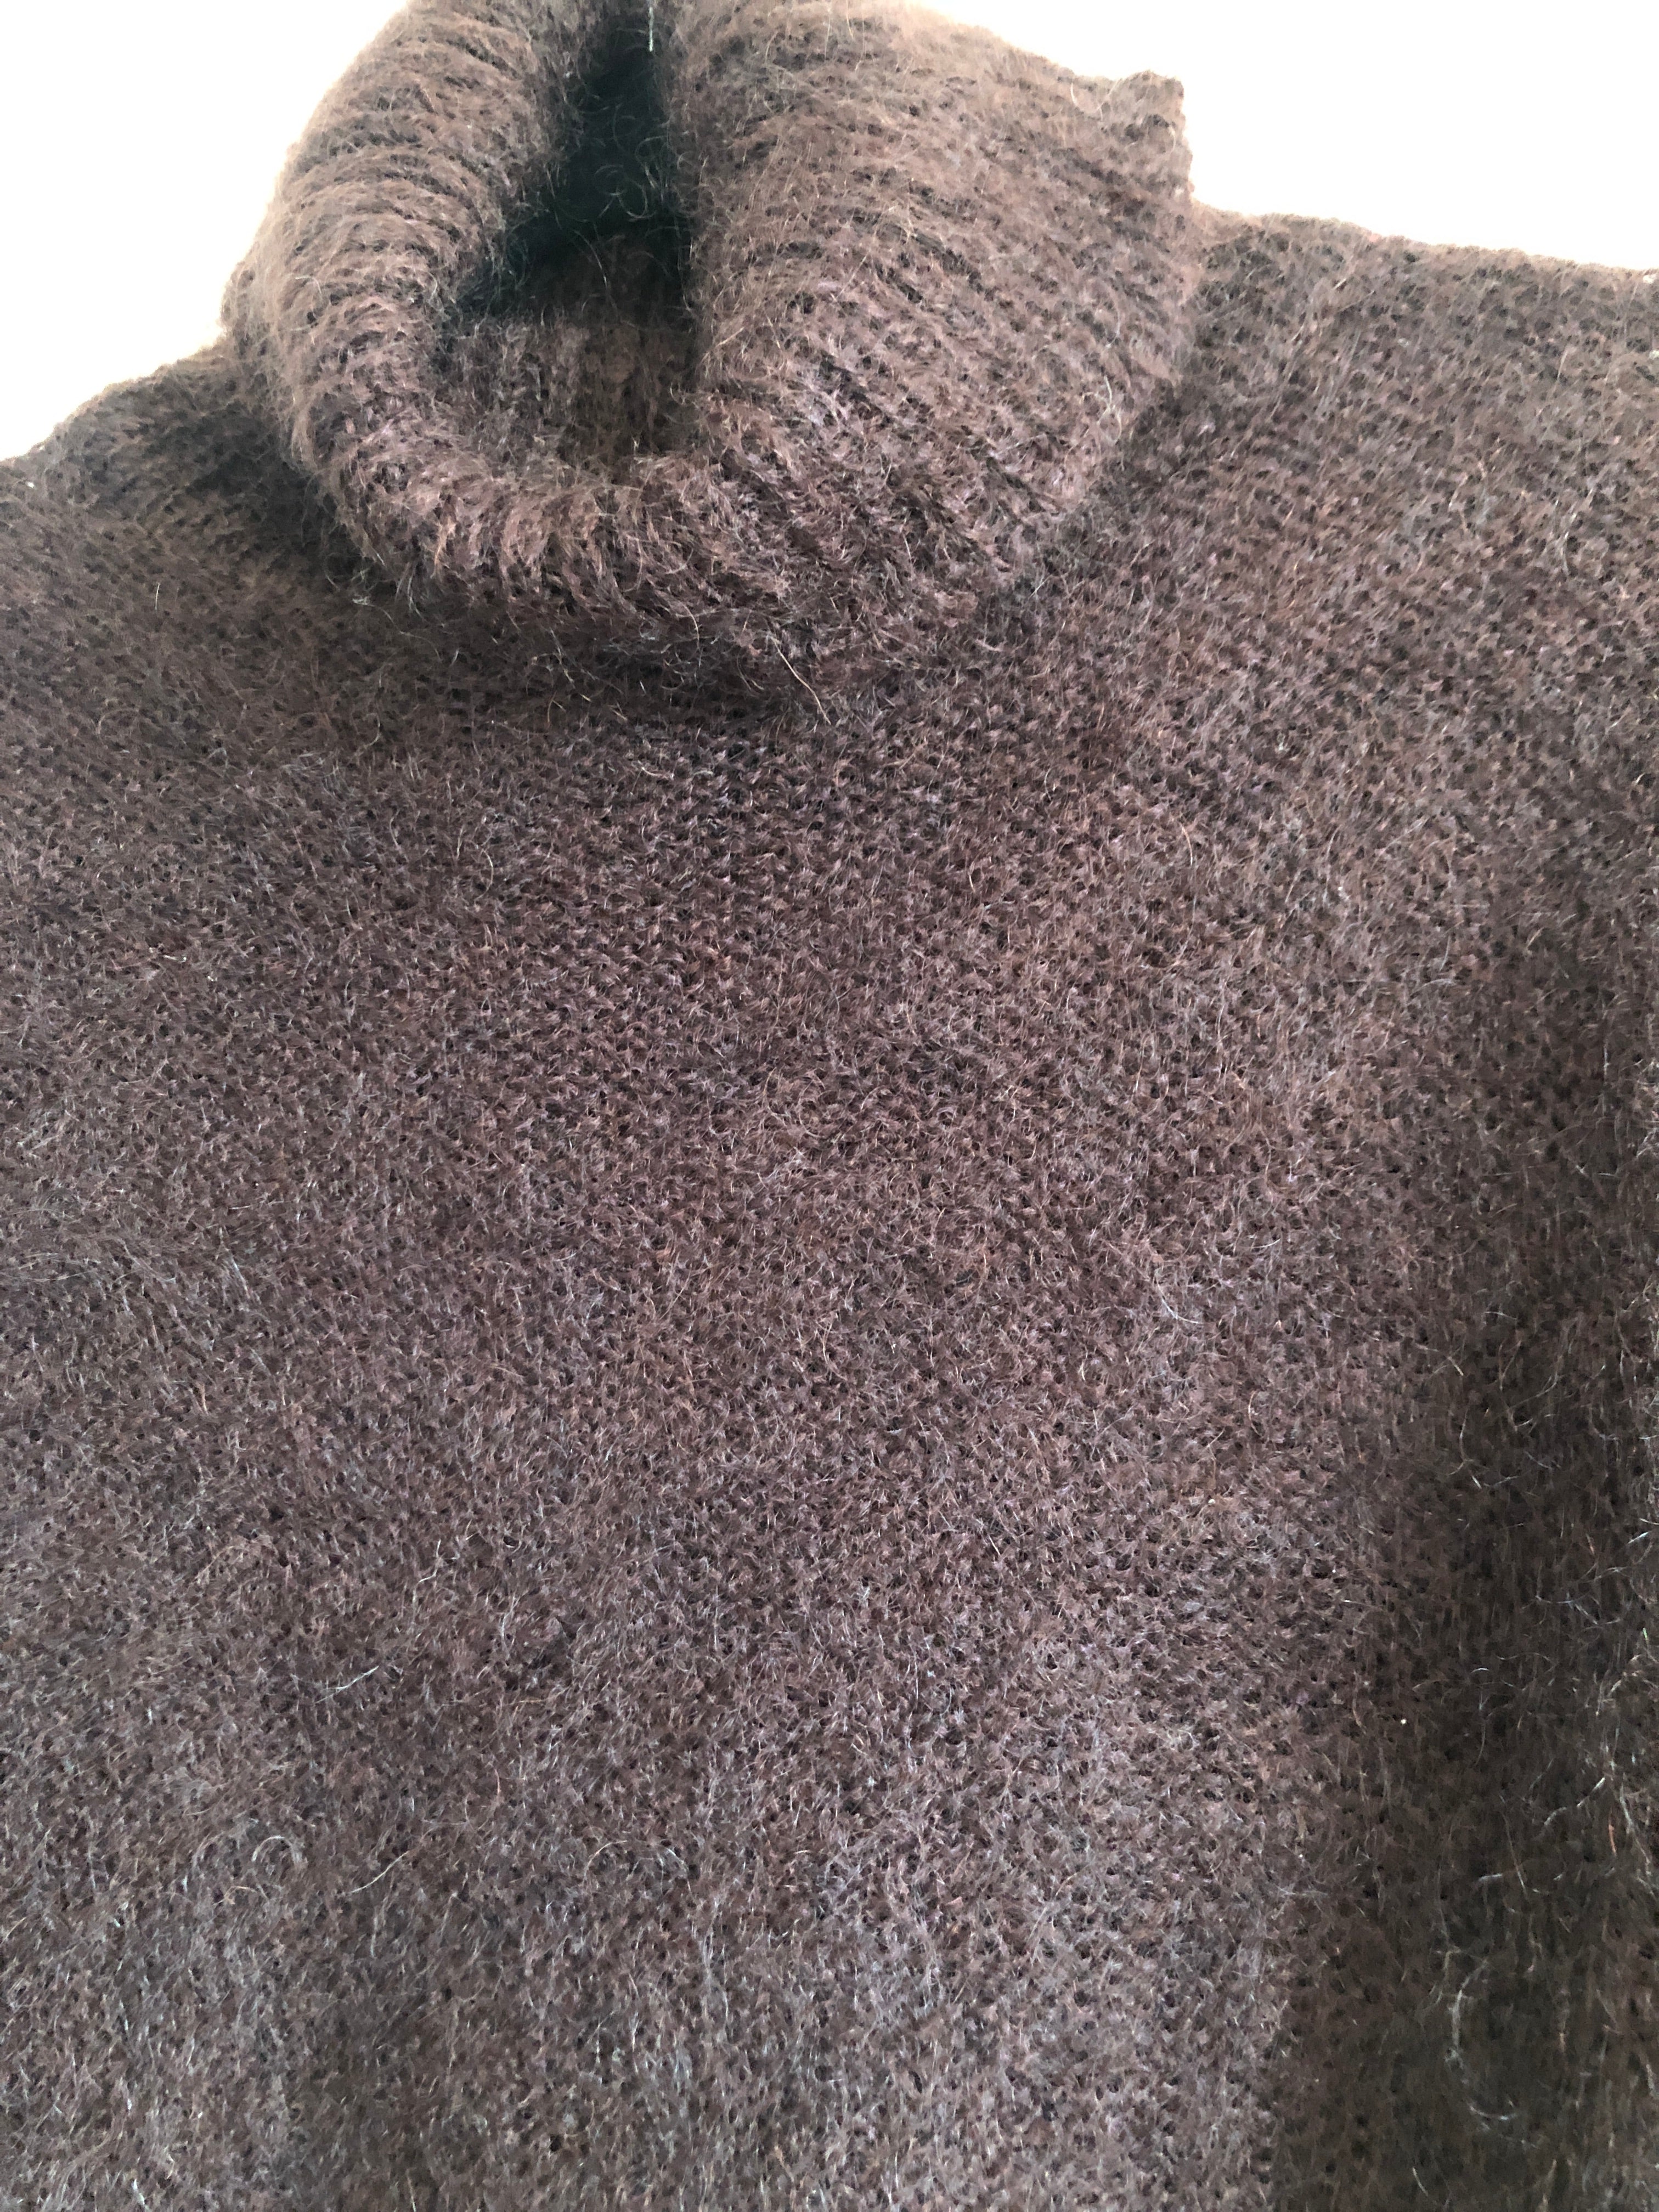 Brown Mohair Turtleneck Sweater, by Patti Pen, Size Large